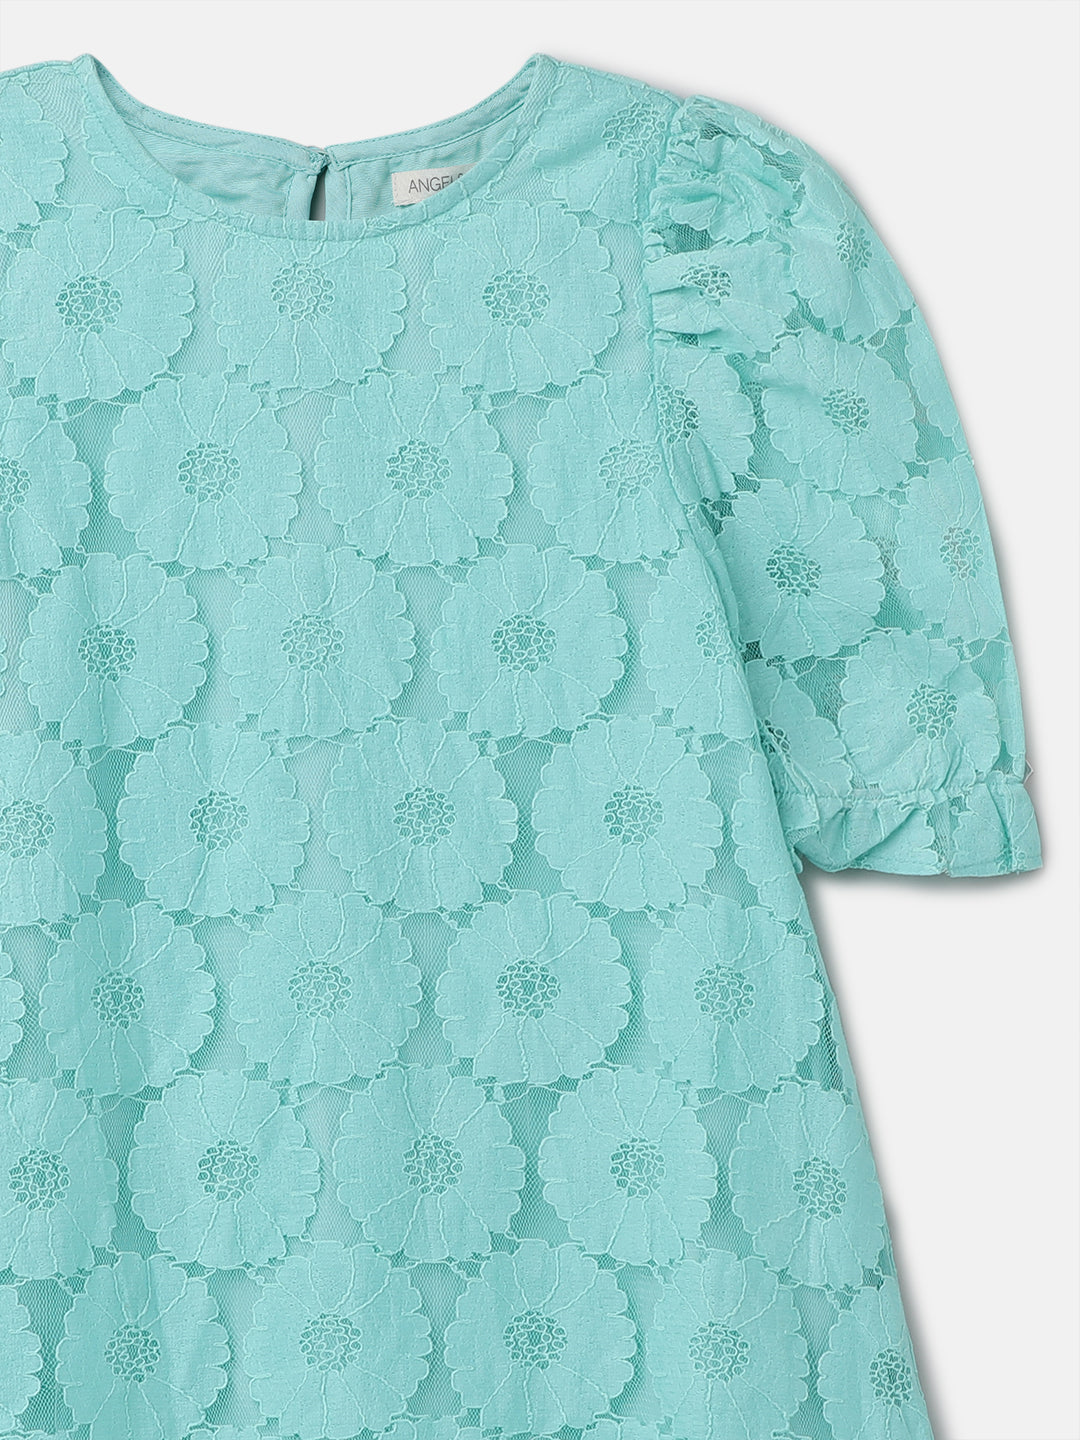 Girls Green Floral Printed Lace Dress